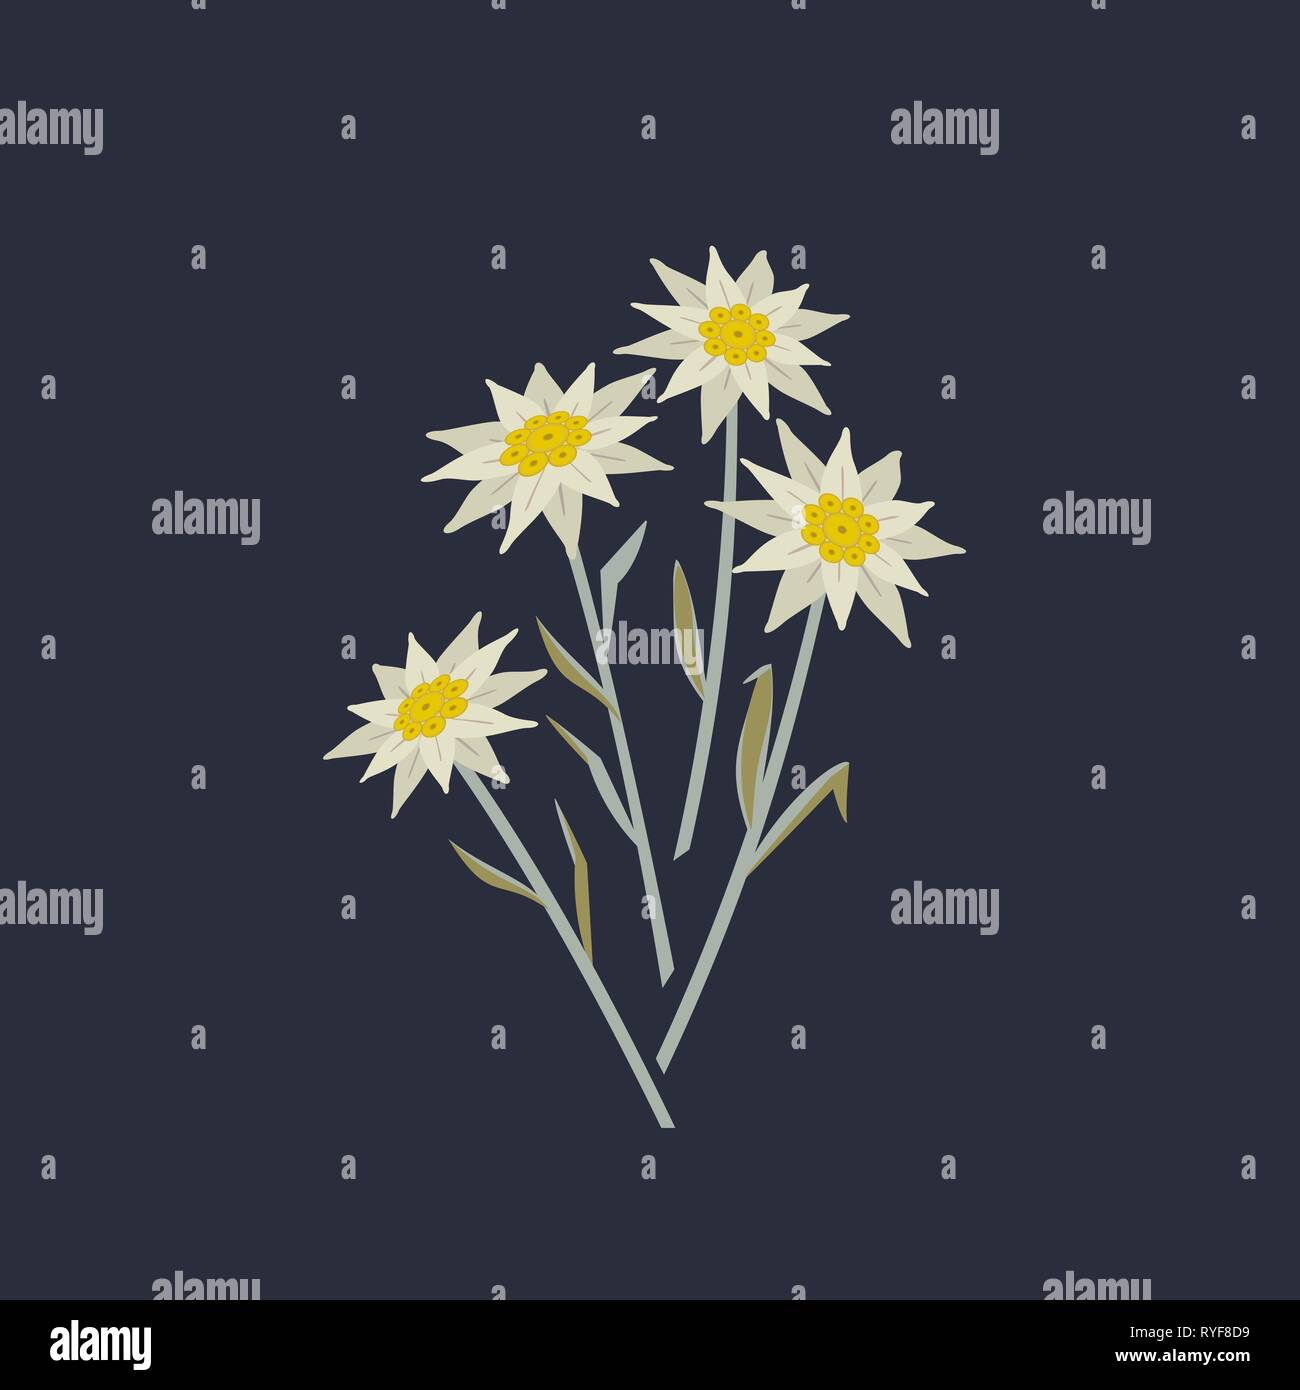 Hand drawn edelweiss flowers icon. Stock Vector